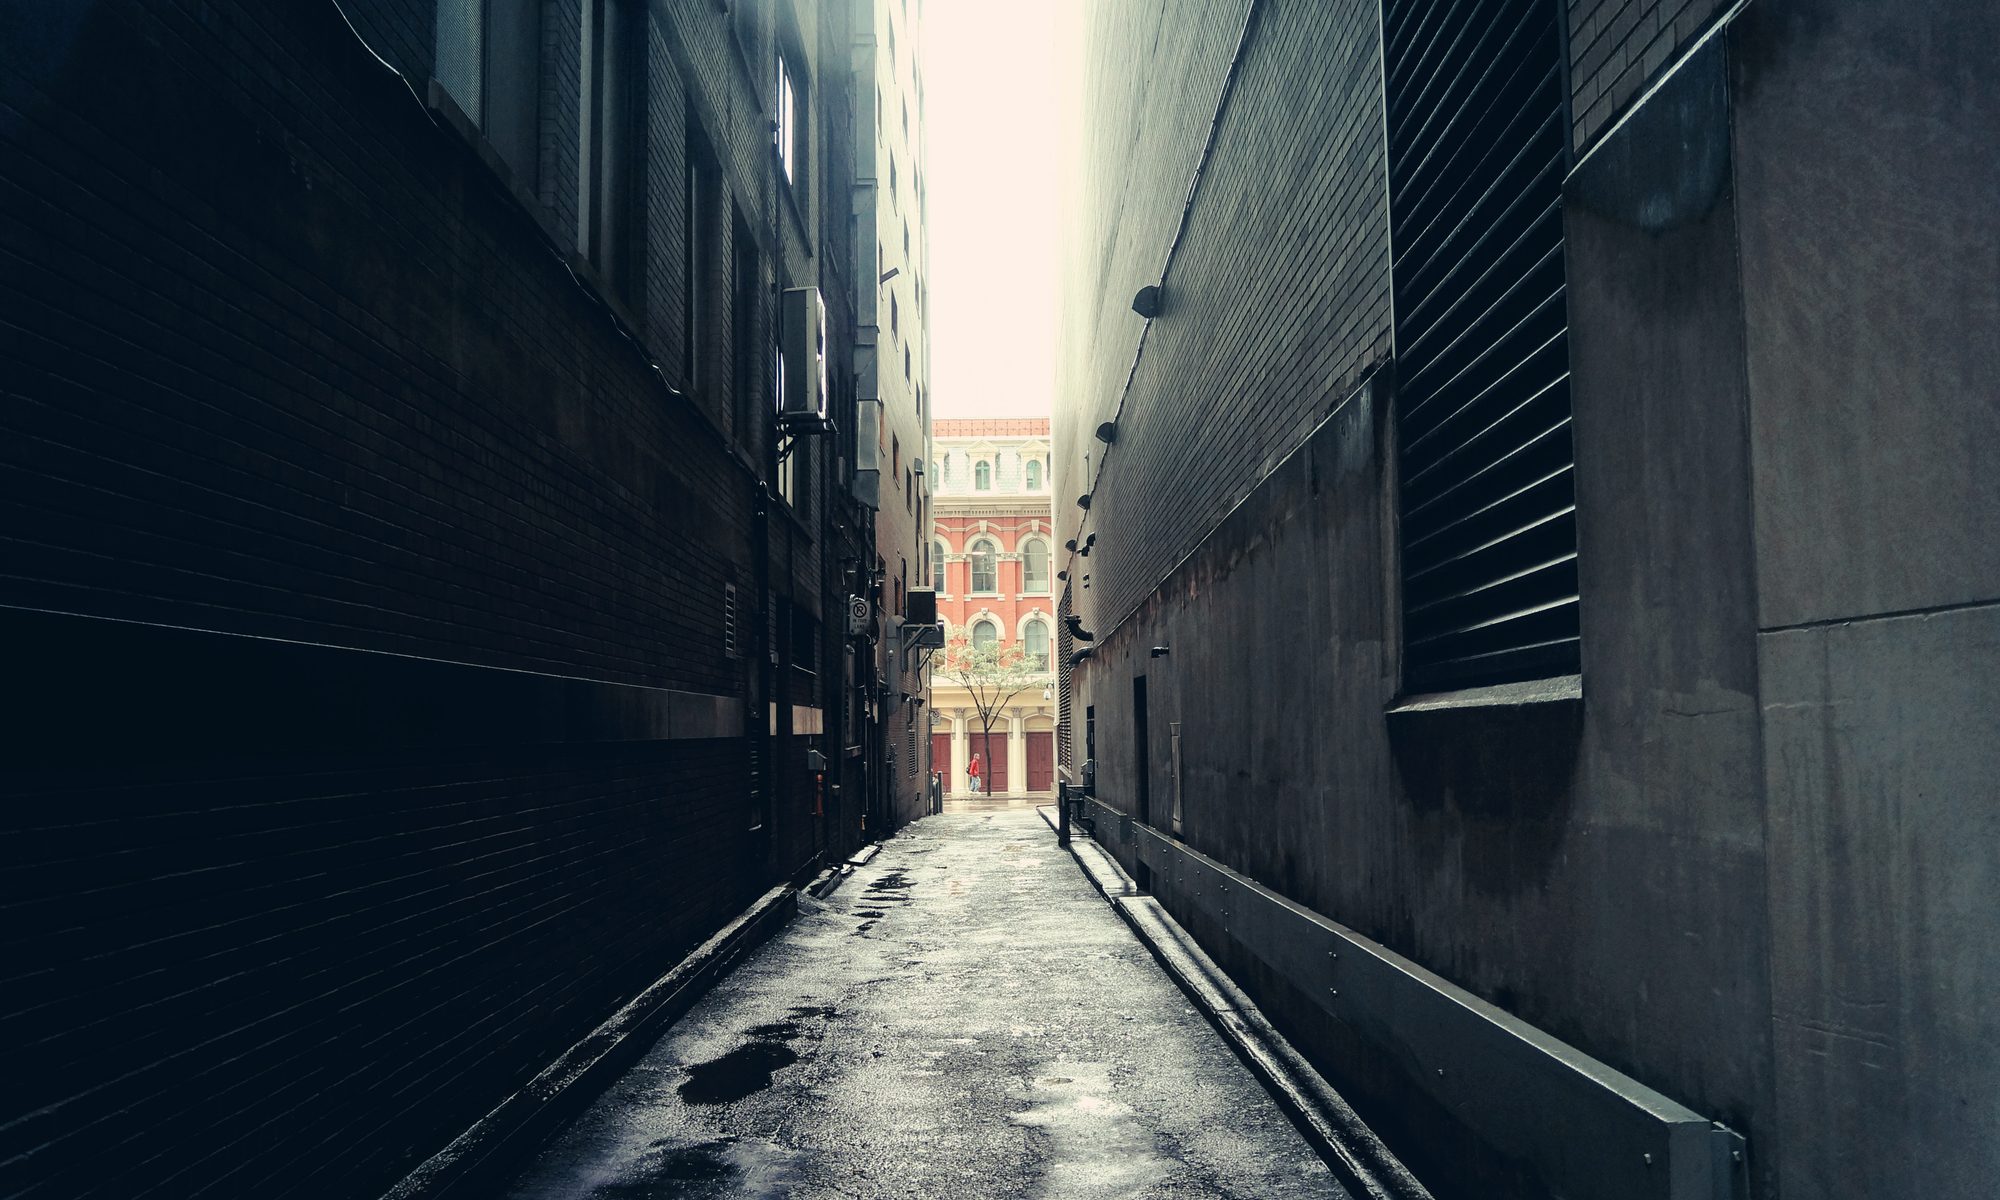 photograph of dark alley with sunlit street in background